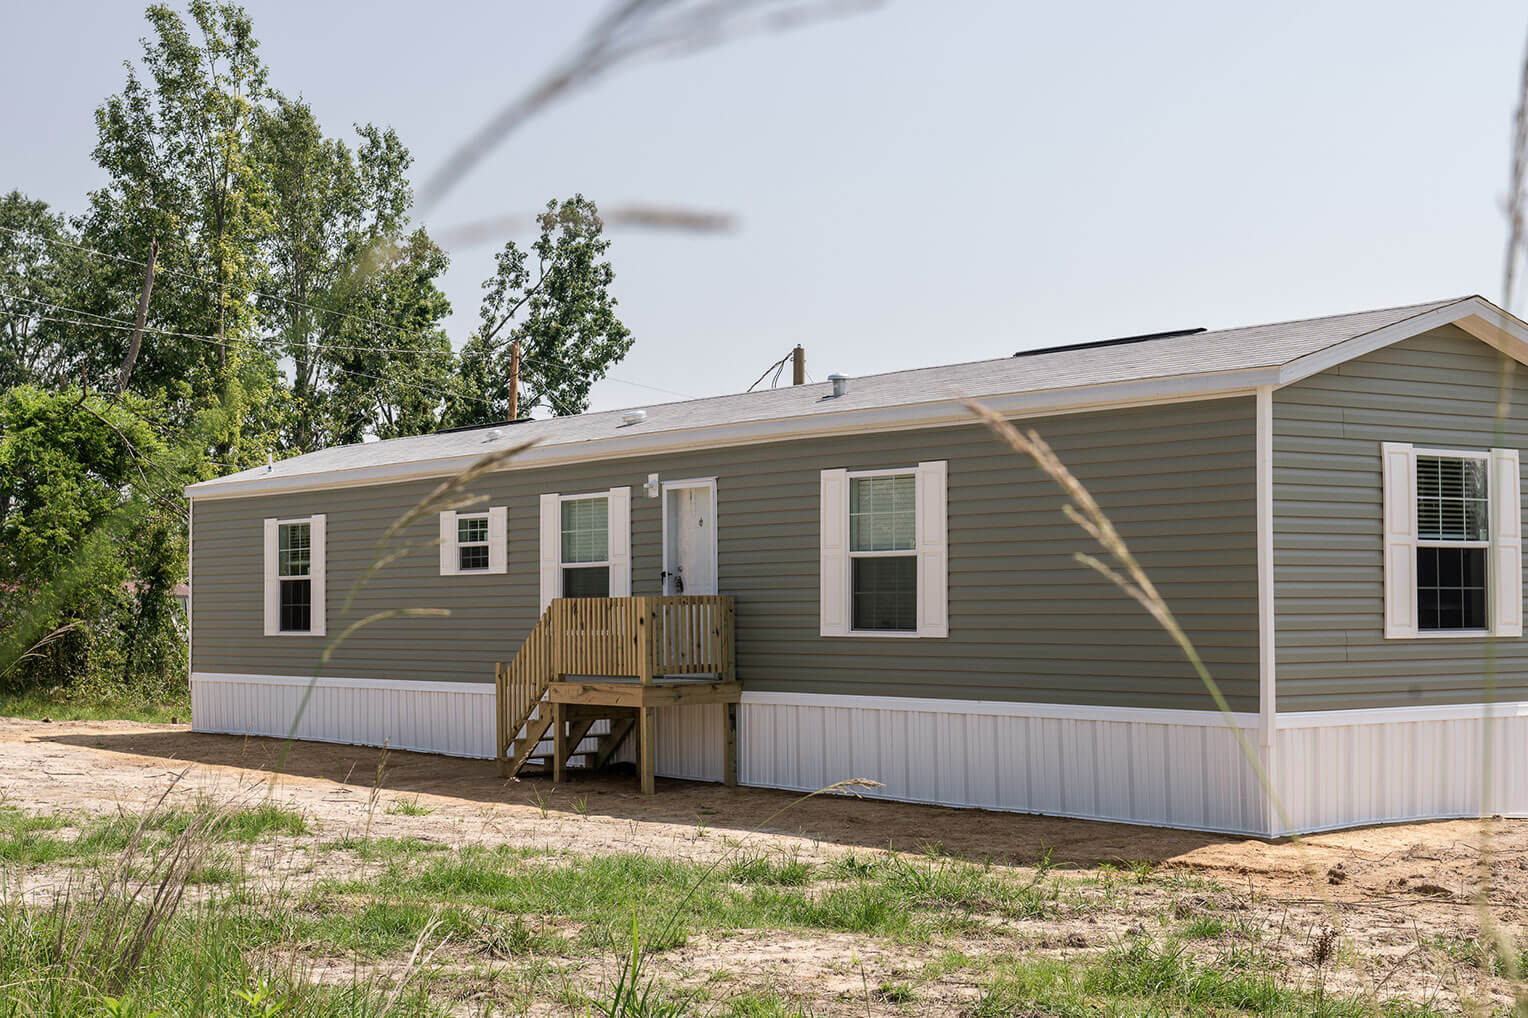 The new mobile homes provided by Samaritan's Purse can withstand winds up to 110 mph.